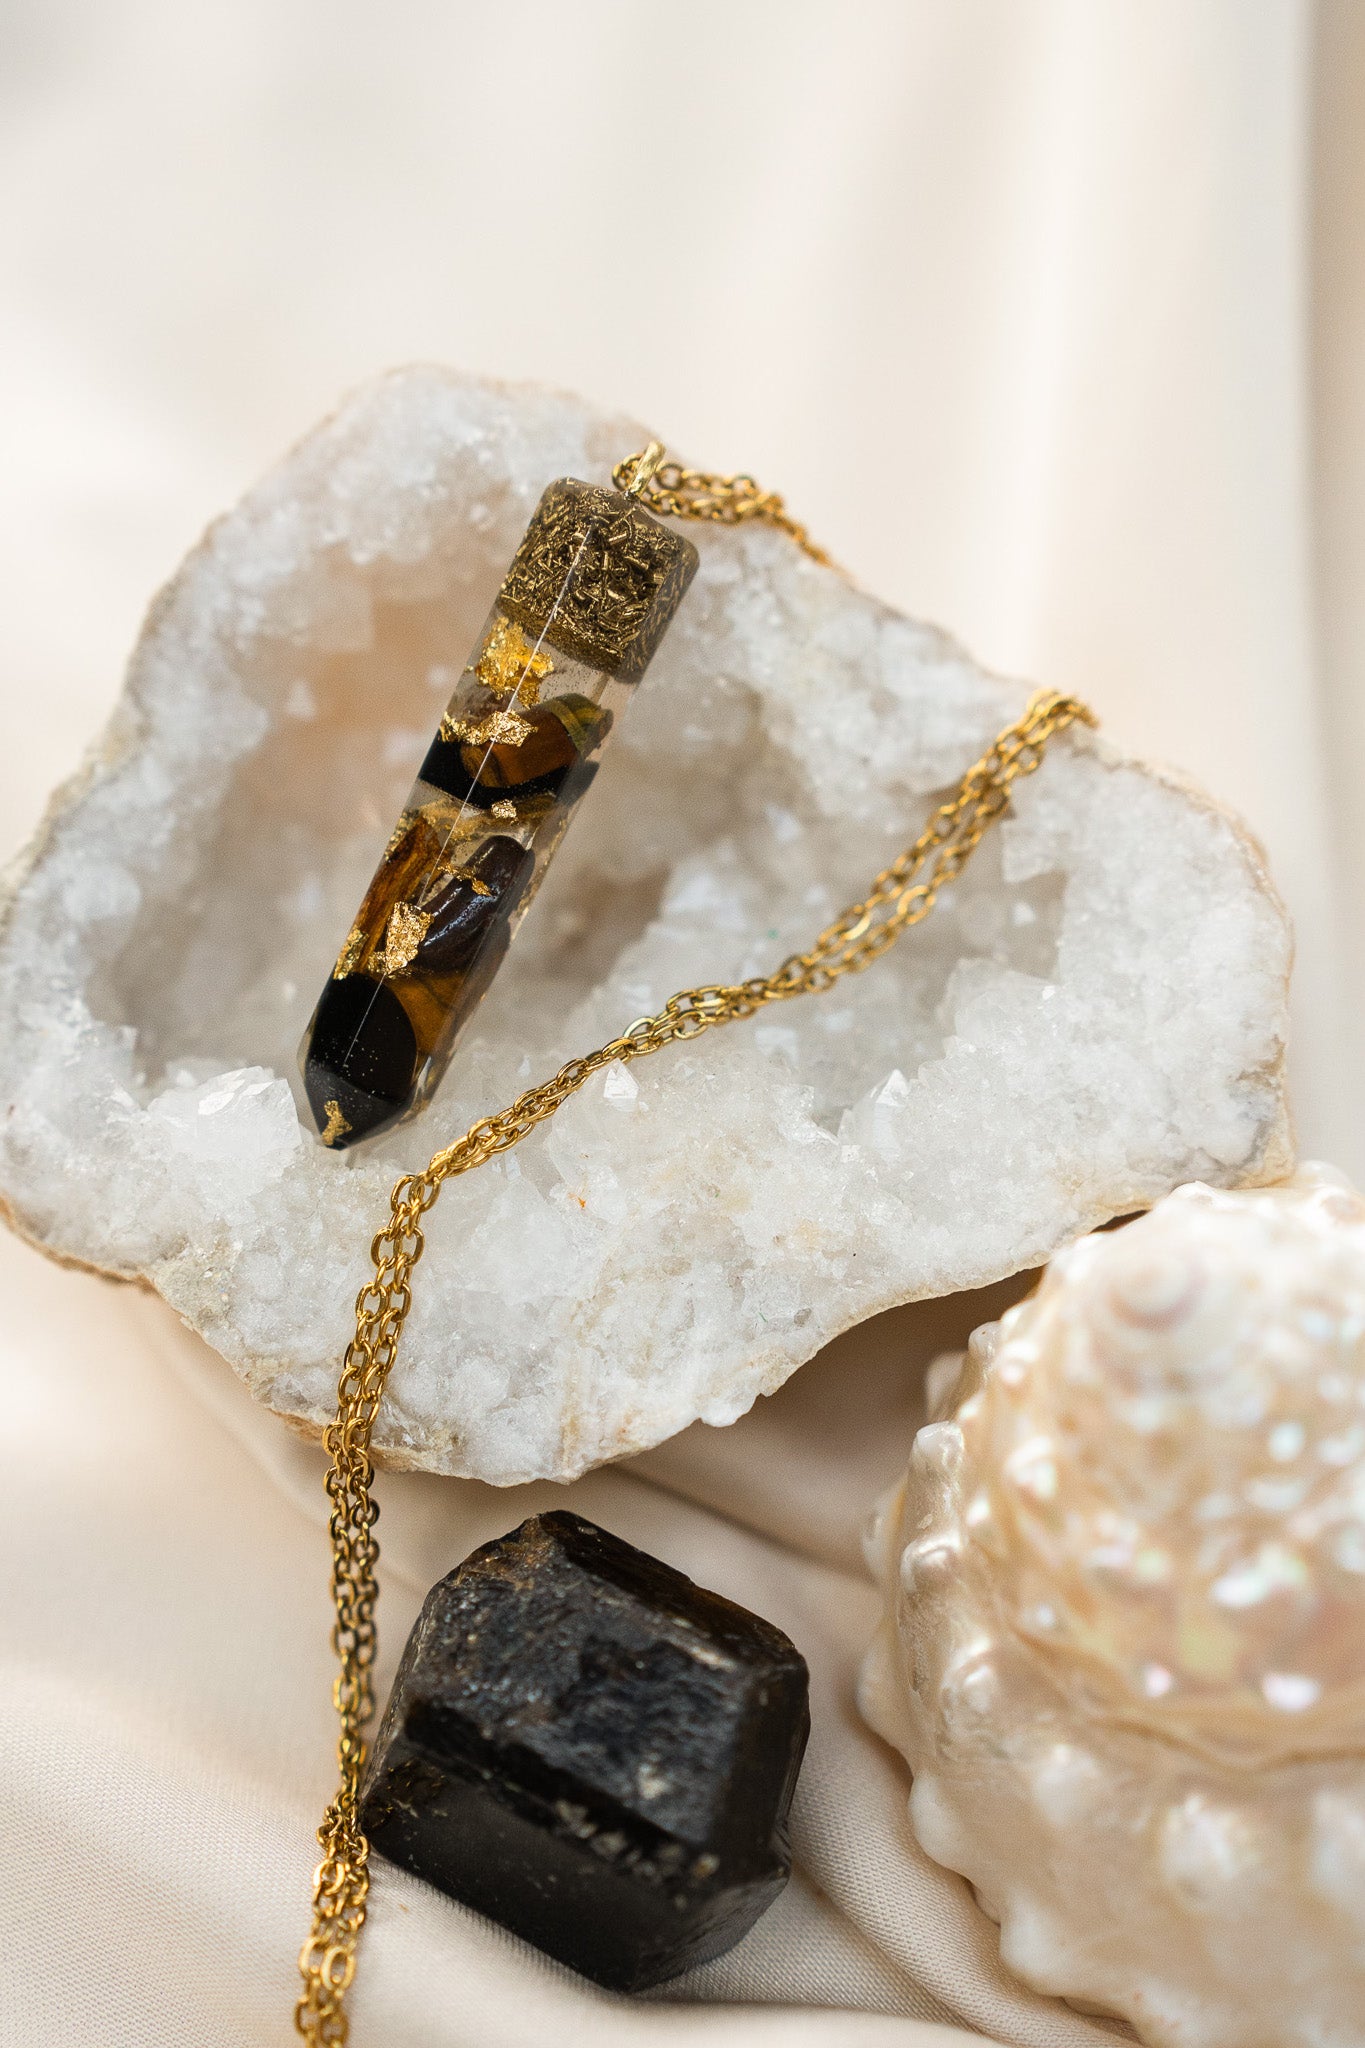 Black Ancient Magick Crystal Healing Pendant For Power, Protection & Prosperity